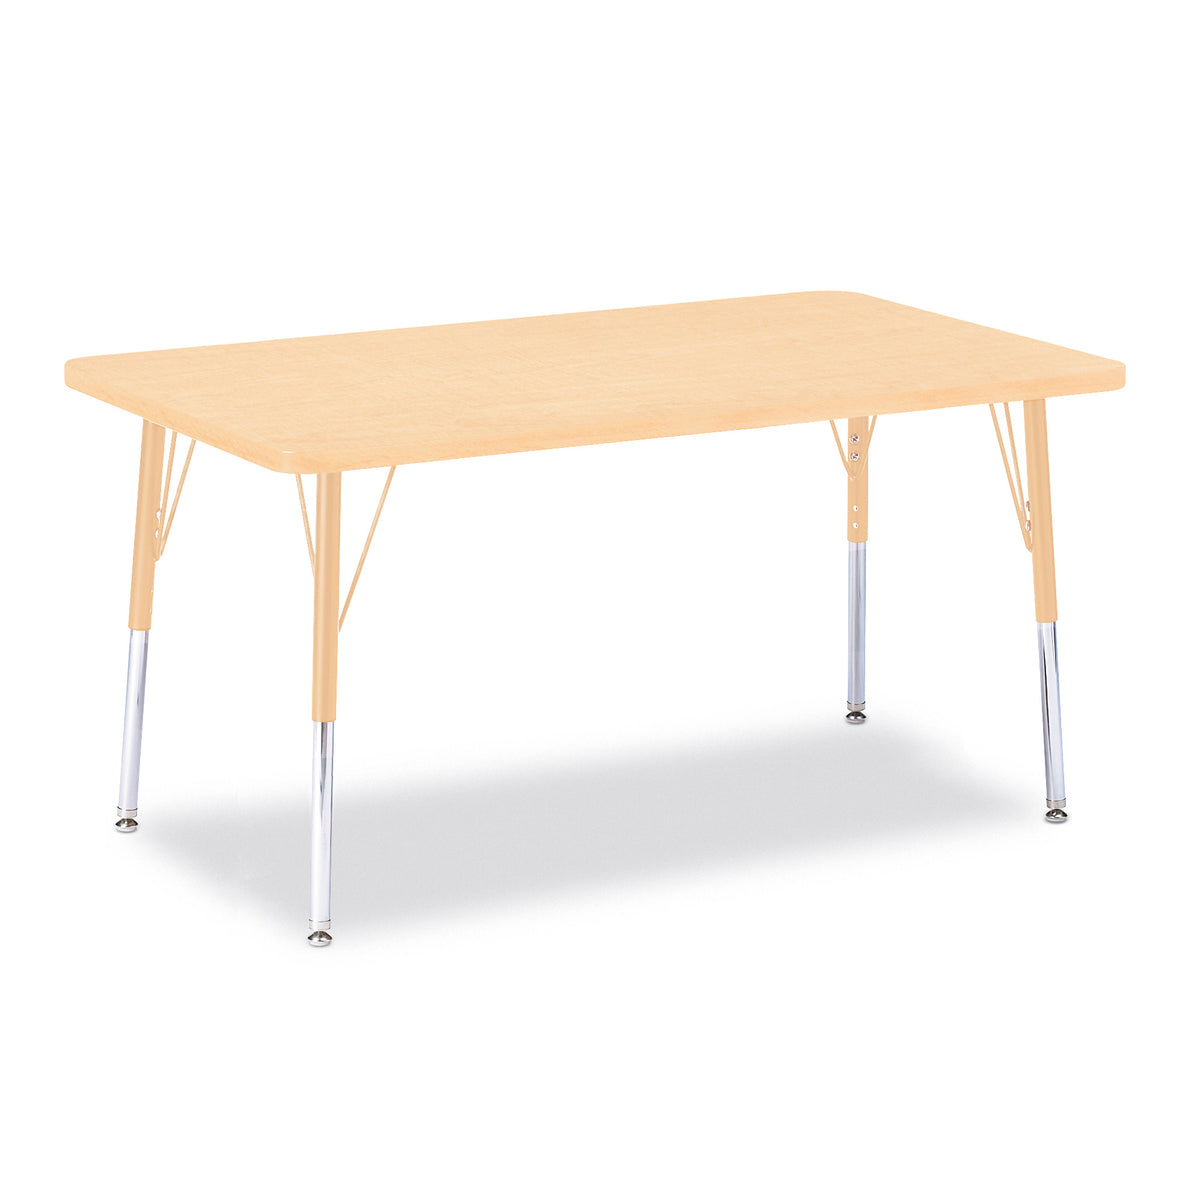 6473JCA251, Berries Rectangle Activity Table - 30" X 48", A-height - Maple/Maple/Camel